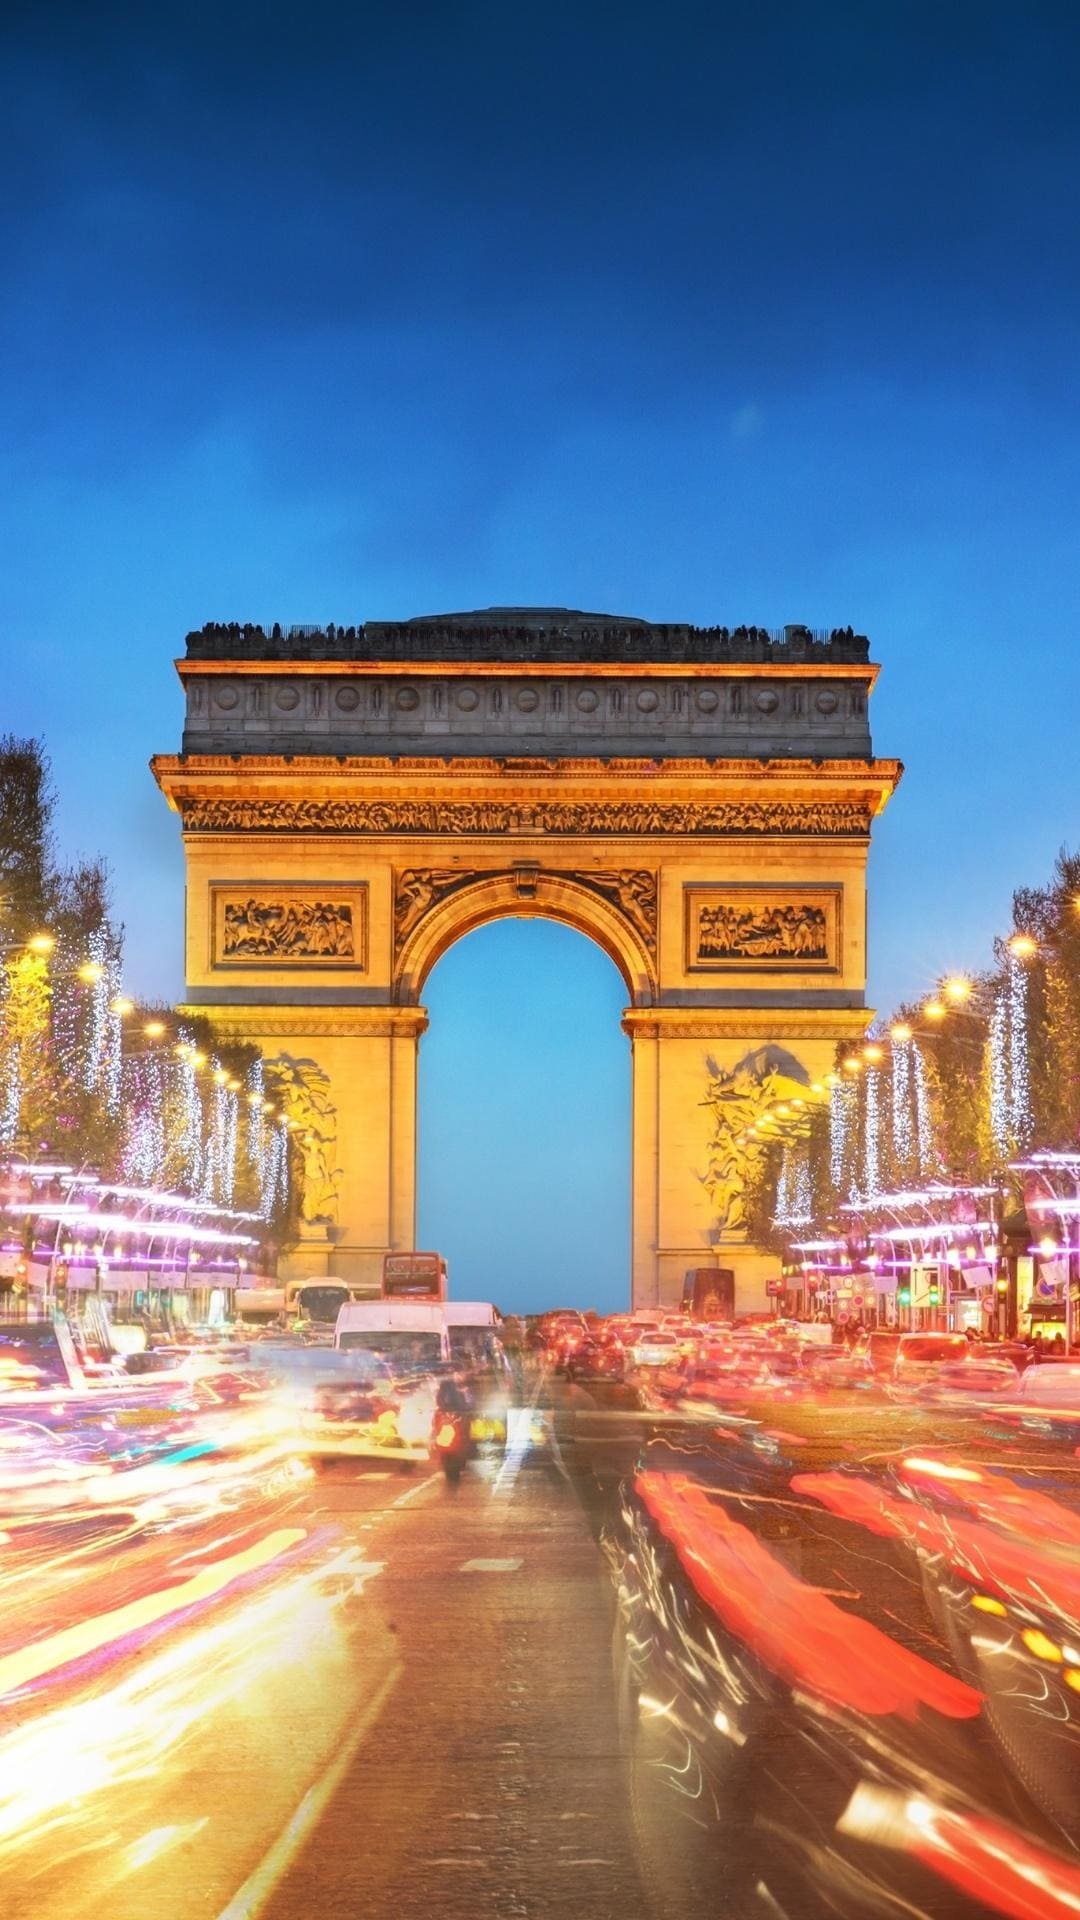 Arc de Triomphe, High quality wallpapers, Stunning images, French heritage, 1080x1920 Full HD Phone